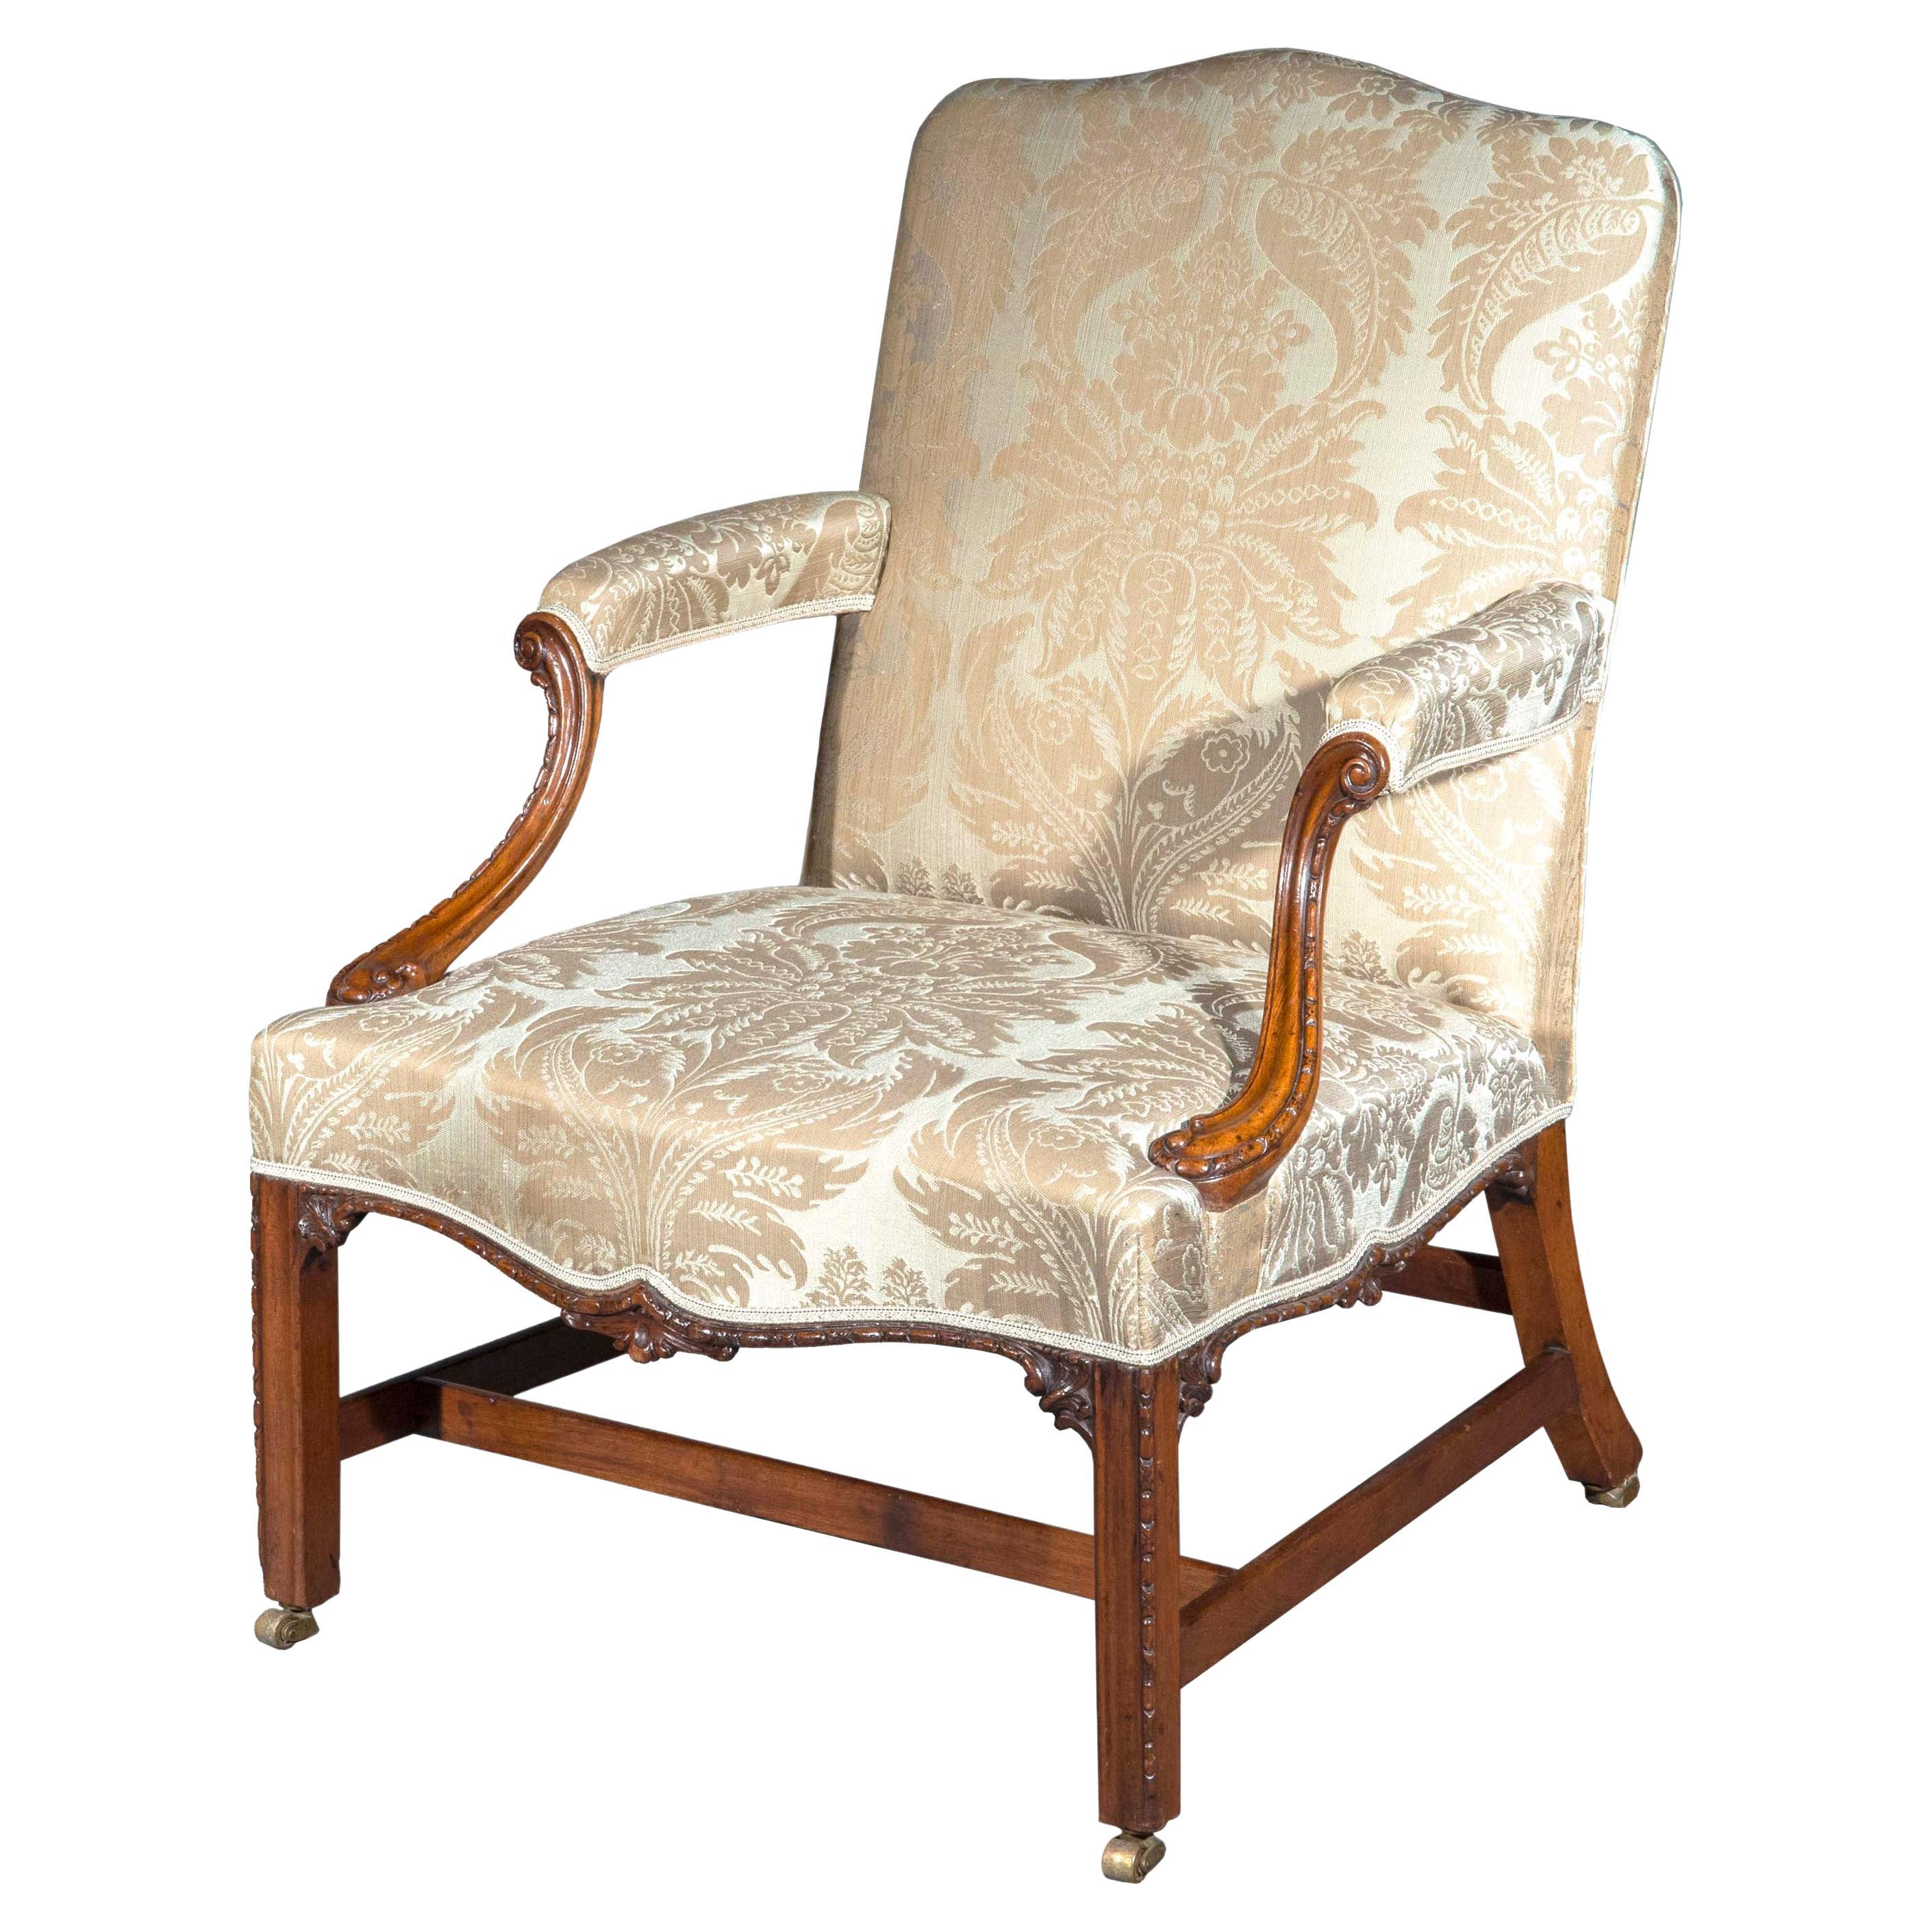 Large English Chippendale Gainsborough Armchair, mid-18th Century For Sale 9